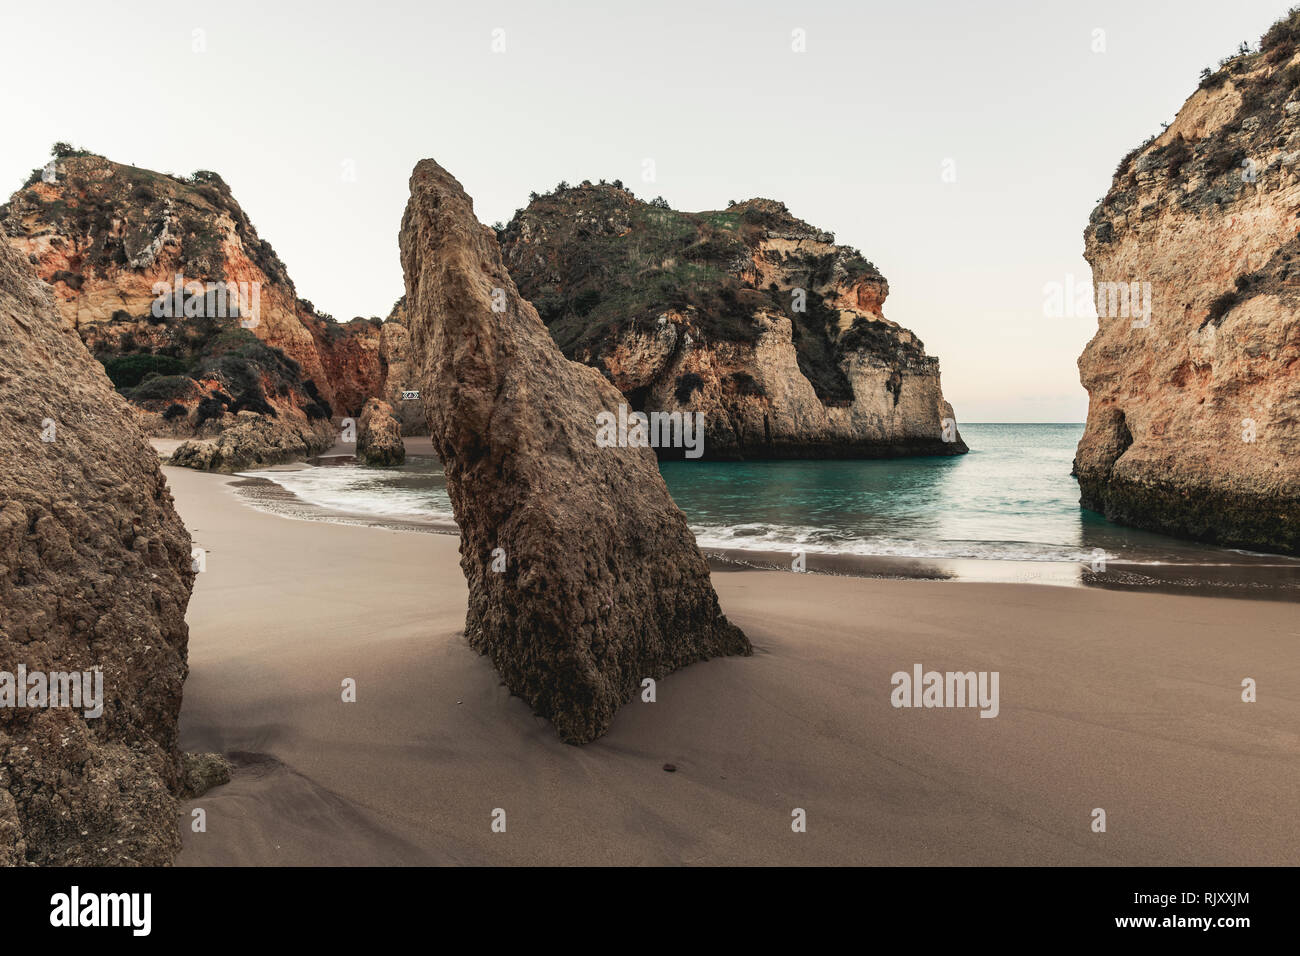 Jagged rock formations and cliffs, Alvor, Algarve, Portugal, Europe Stock Photo